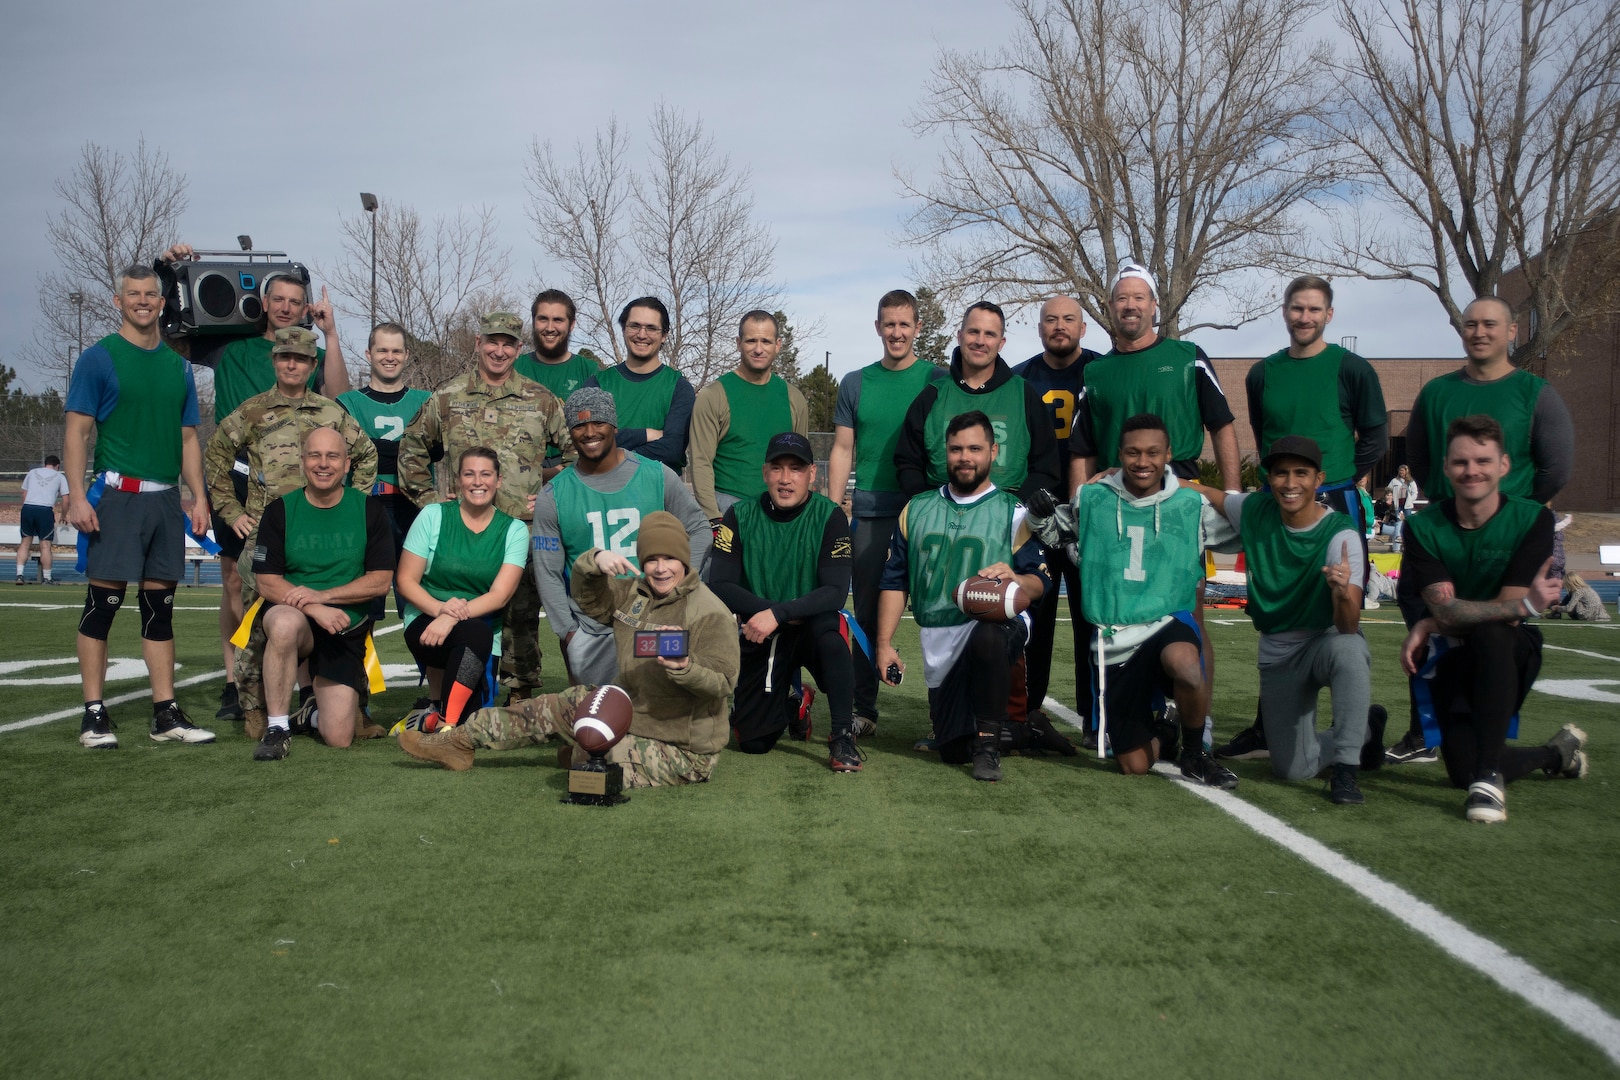 Flag football team members pose for a group photo